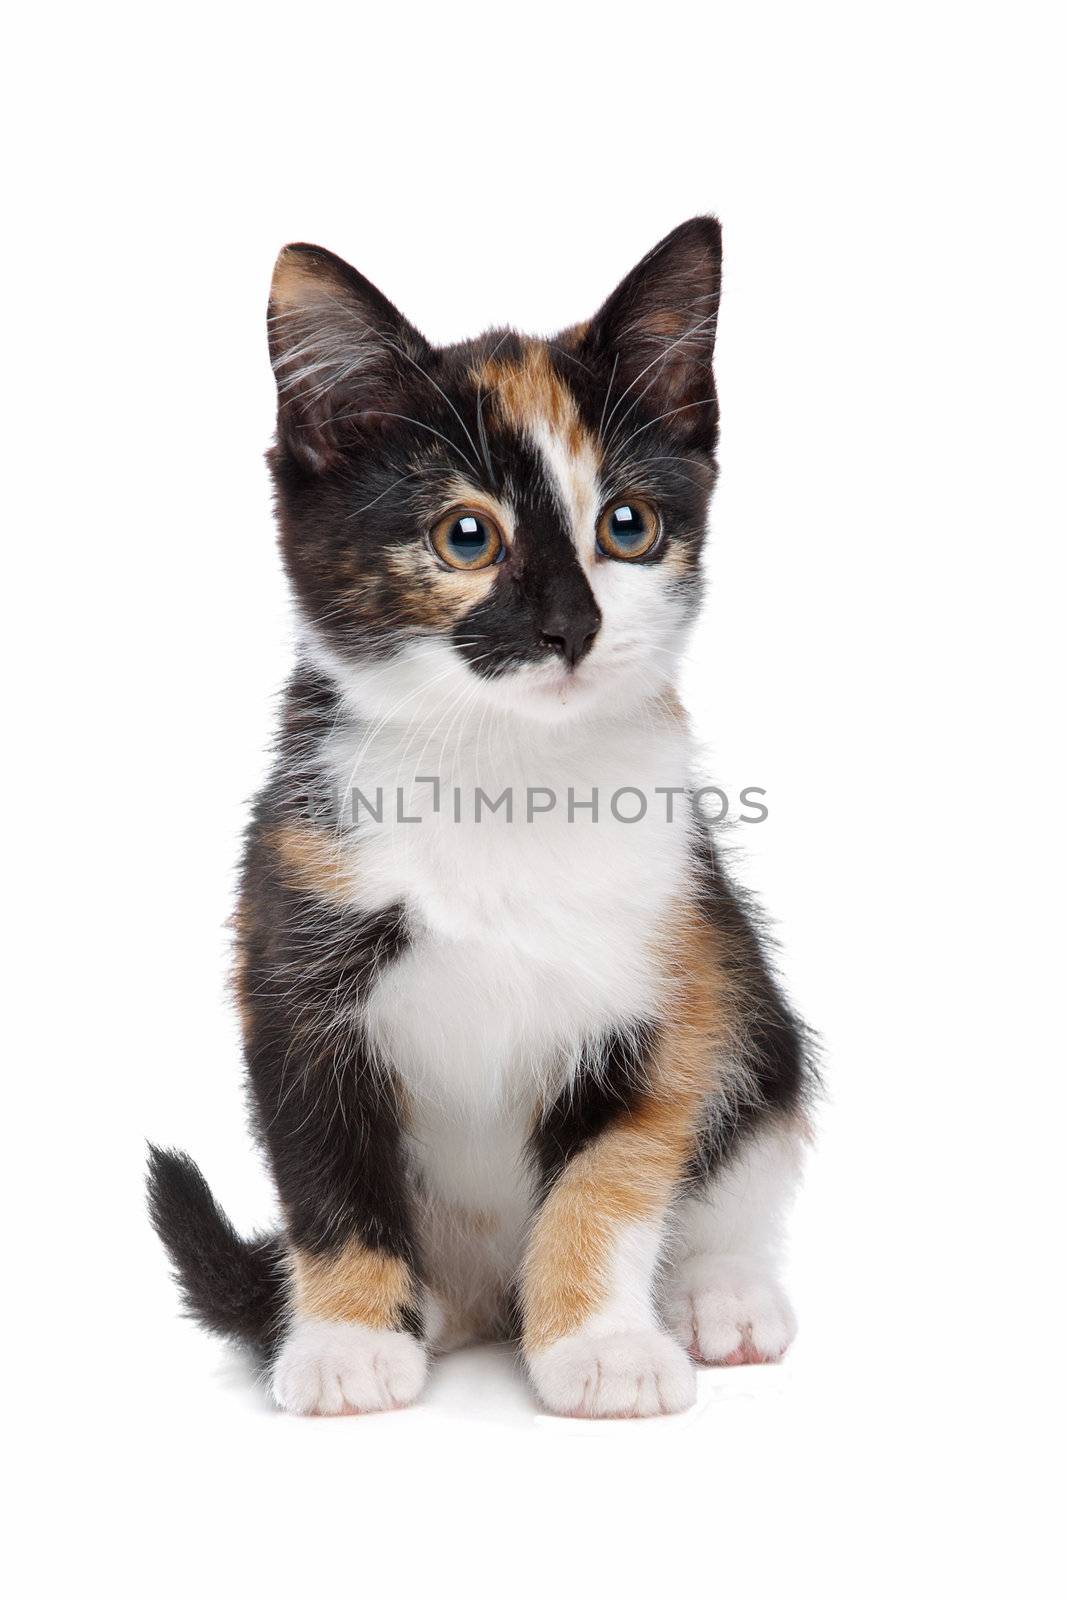 Little kitten in front of a white background